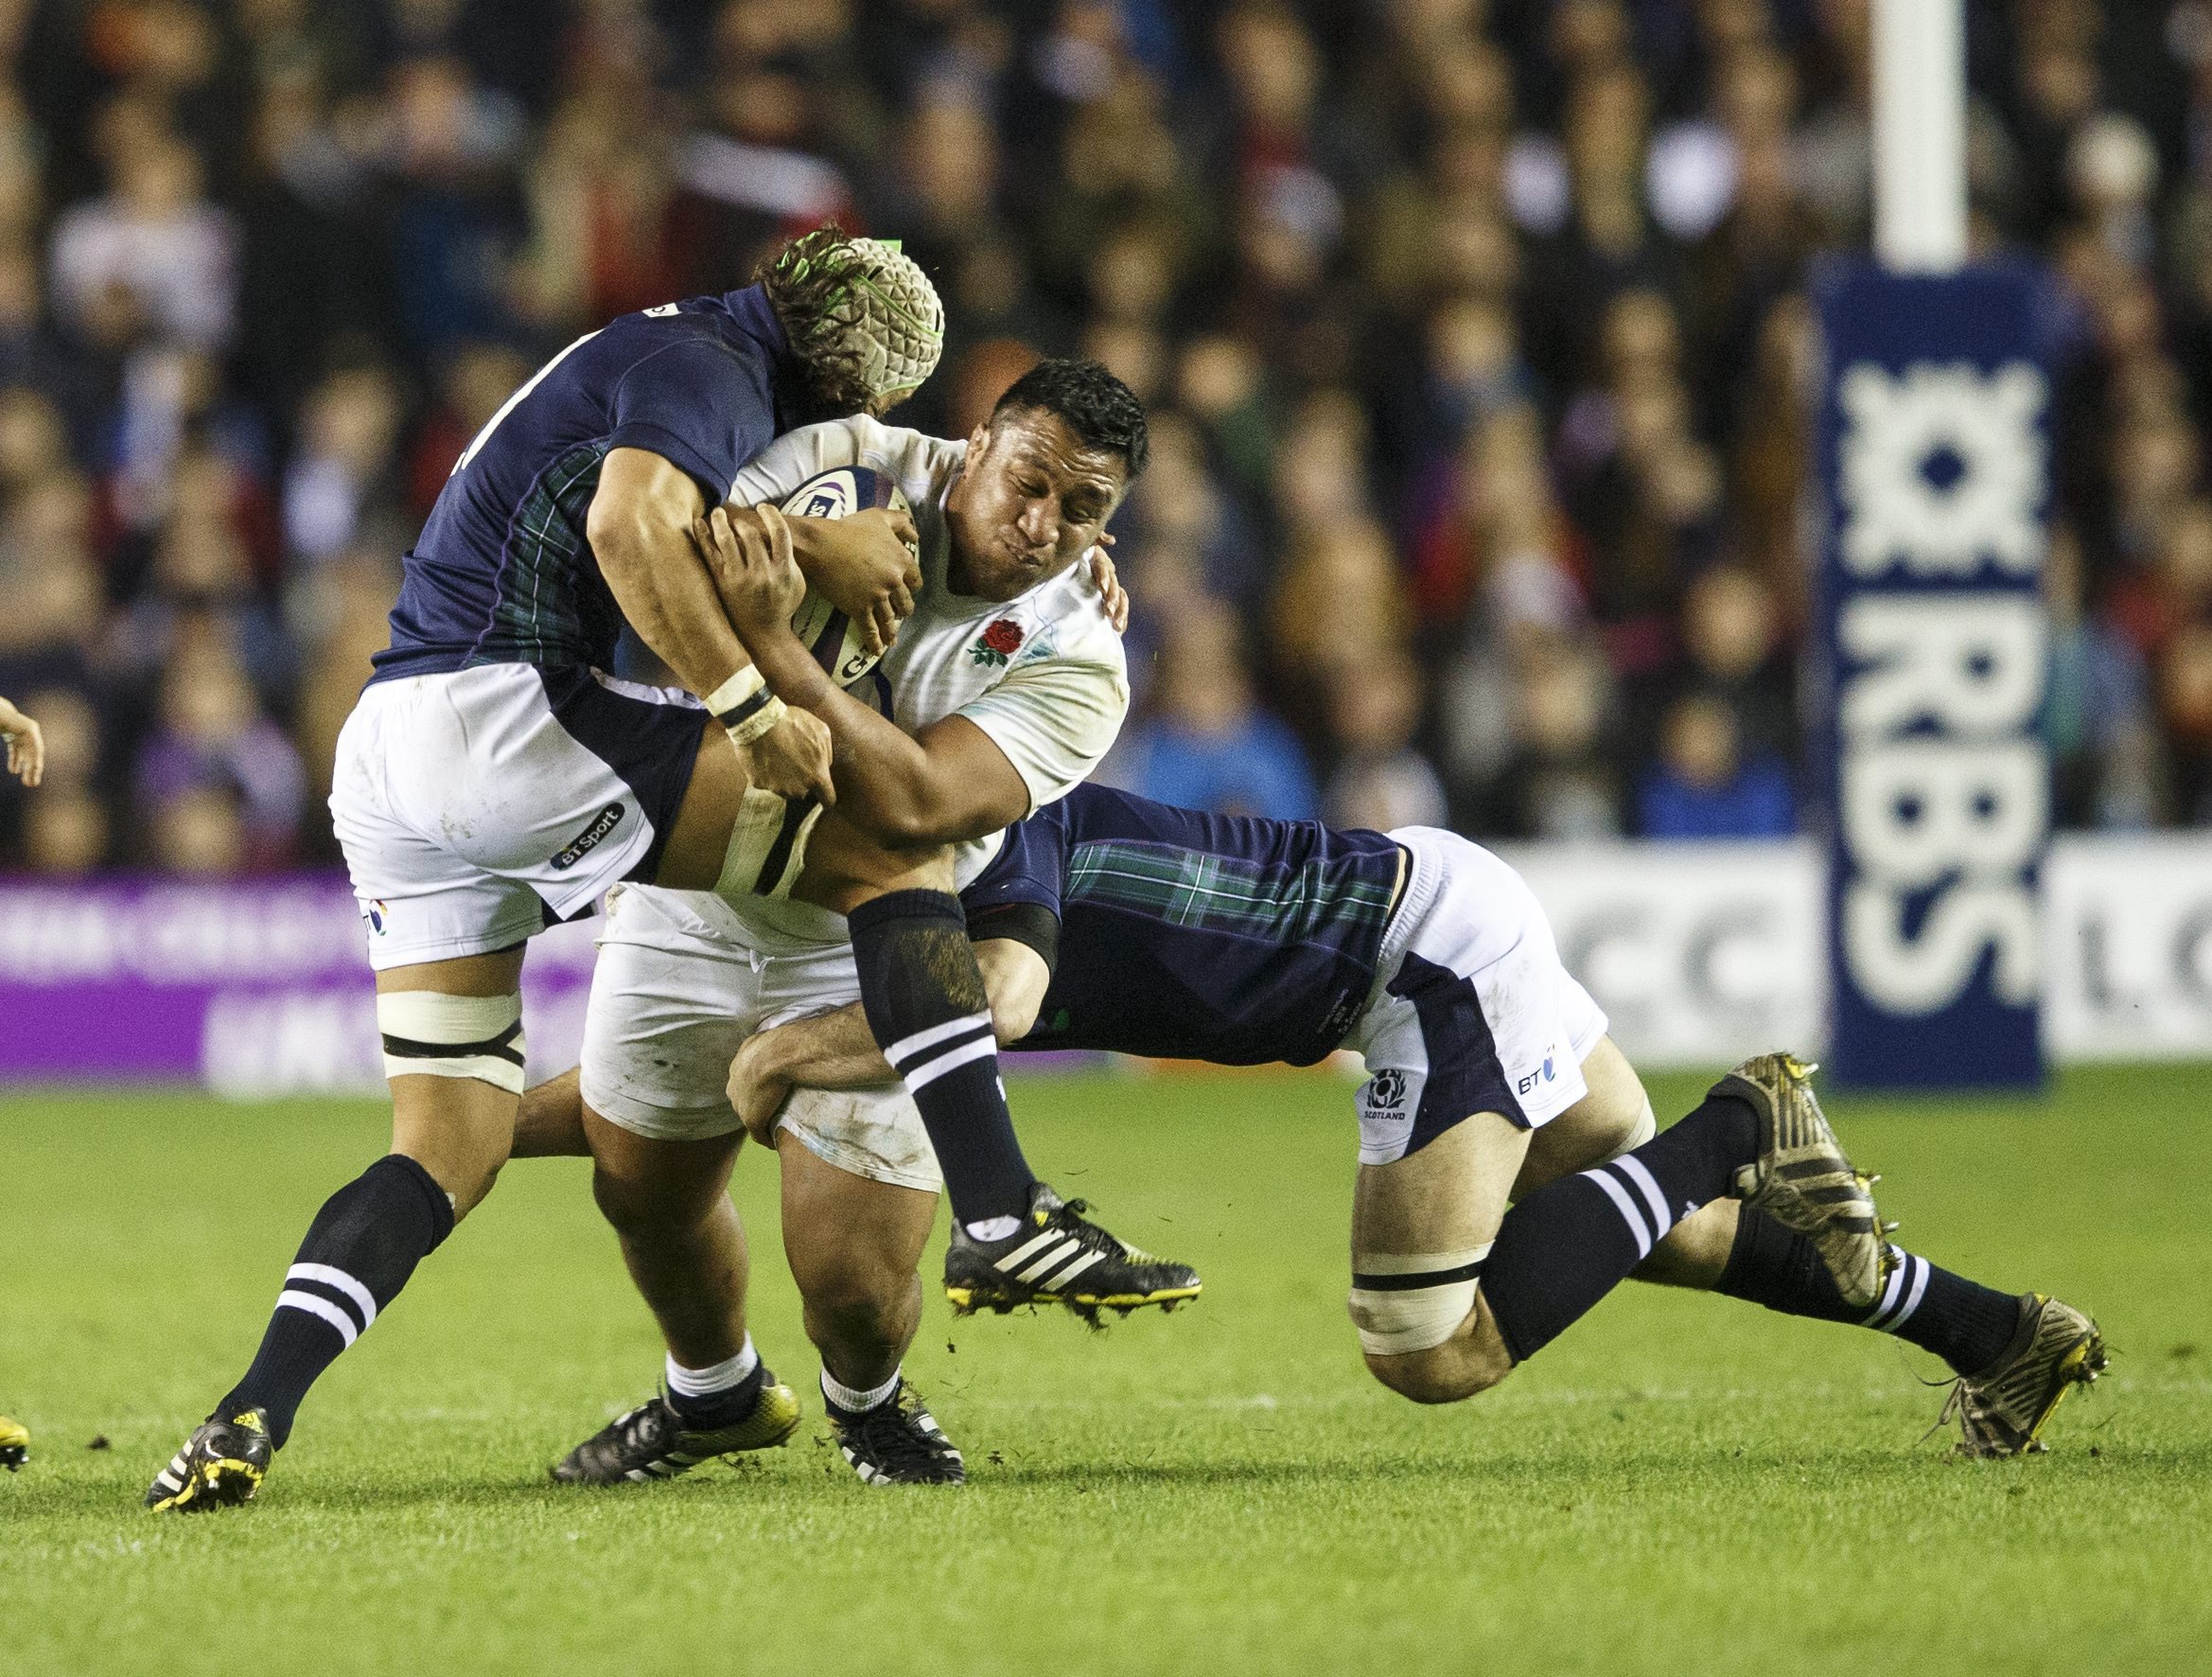 England's Billy Vunipola proves a handful for the Scotland defence during the 15-9 victory at Murrayfield. Photo: EPA